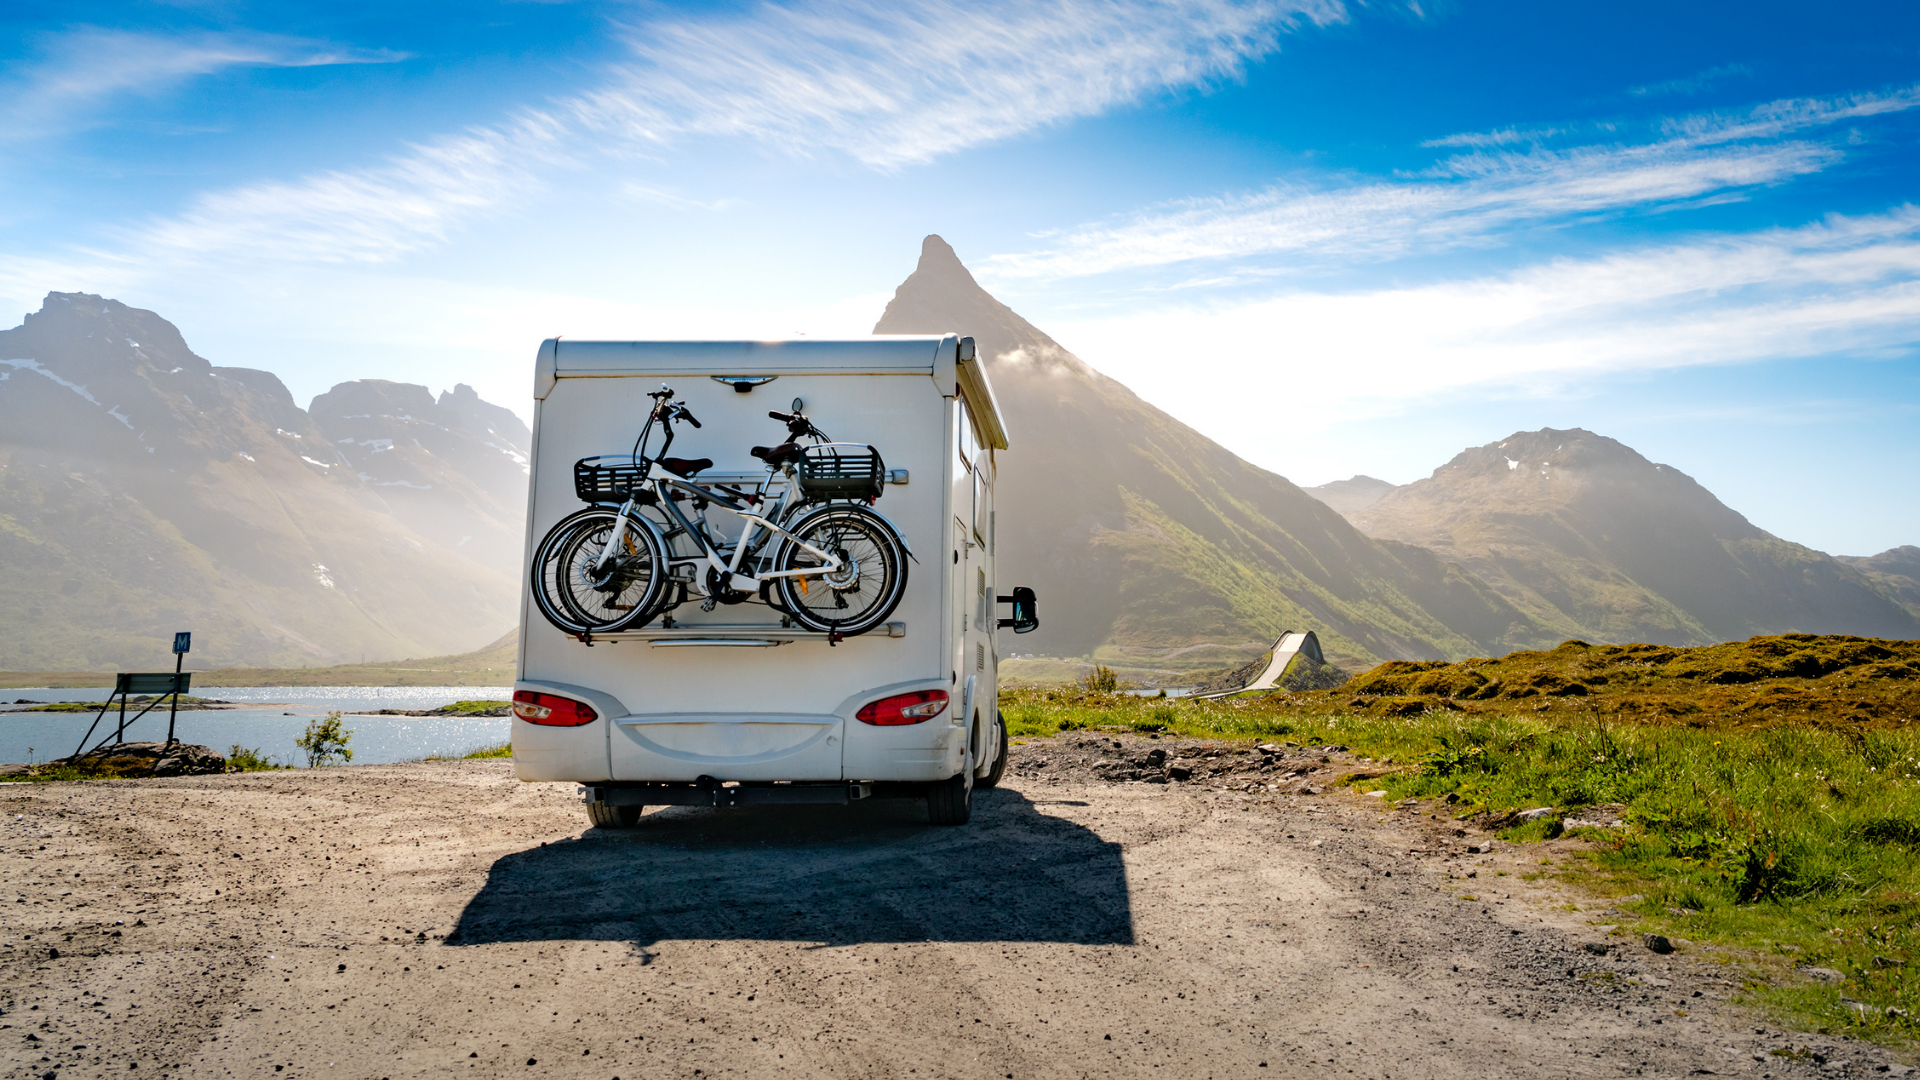 Campercontact – Making motorhome travellers’ lives easier by providing high quality location data